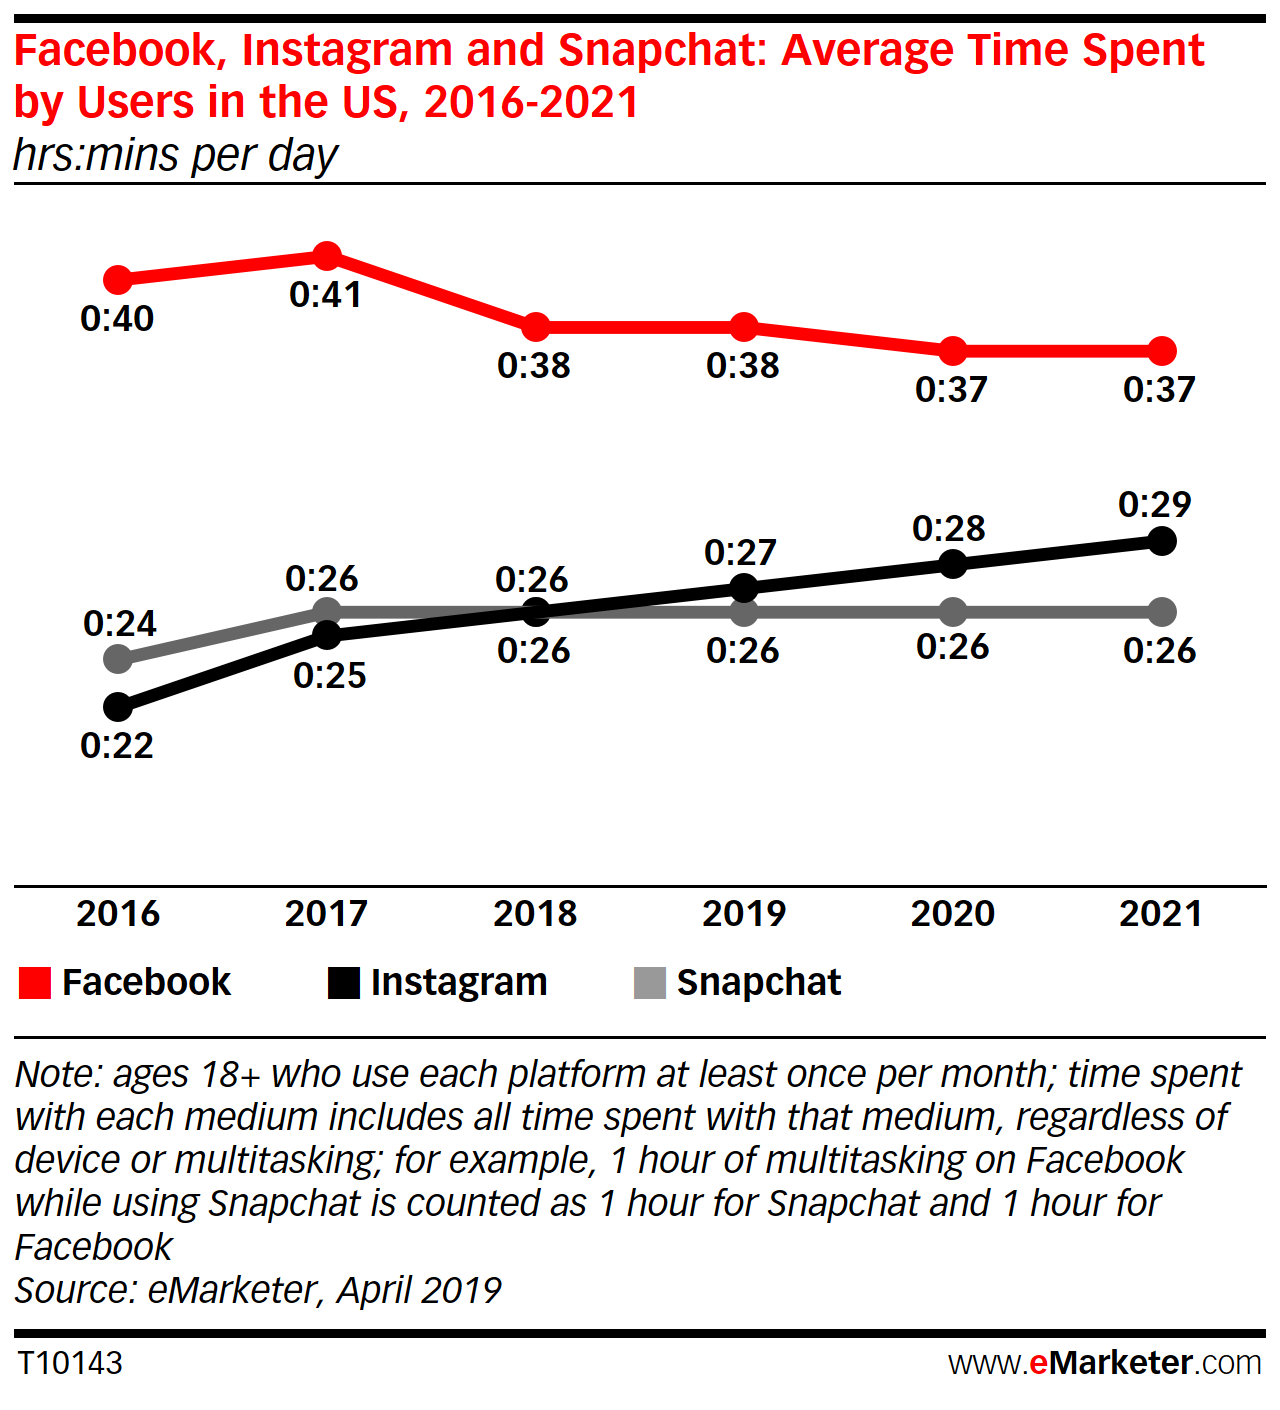 People Are Using Instagram More, Facebook and Snapchat Less